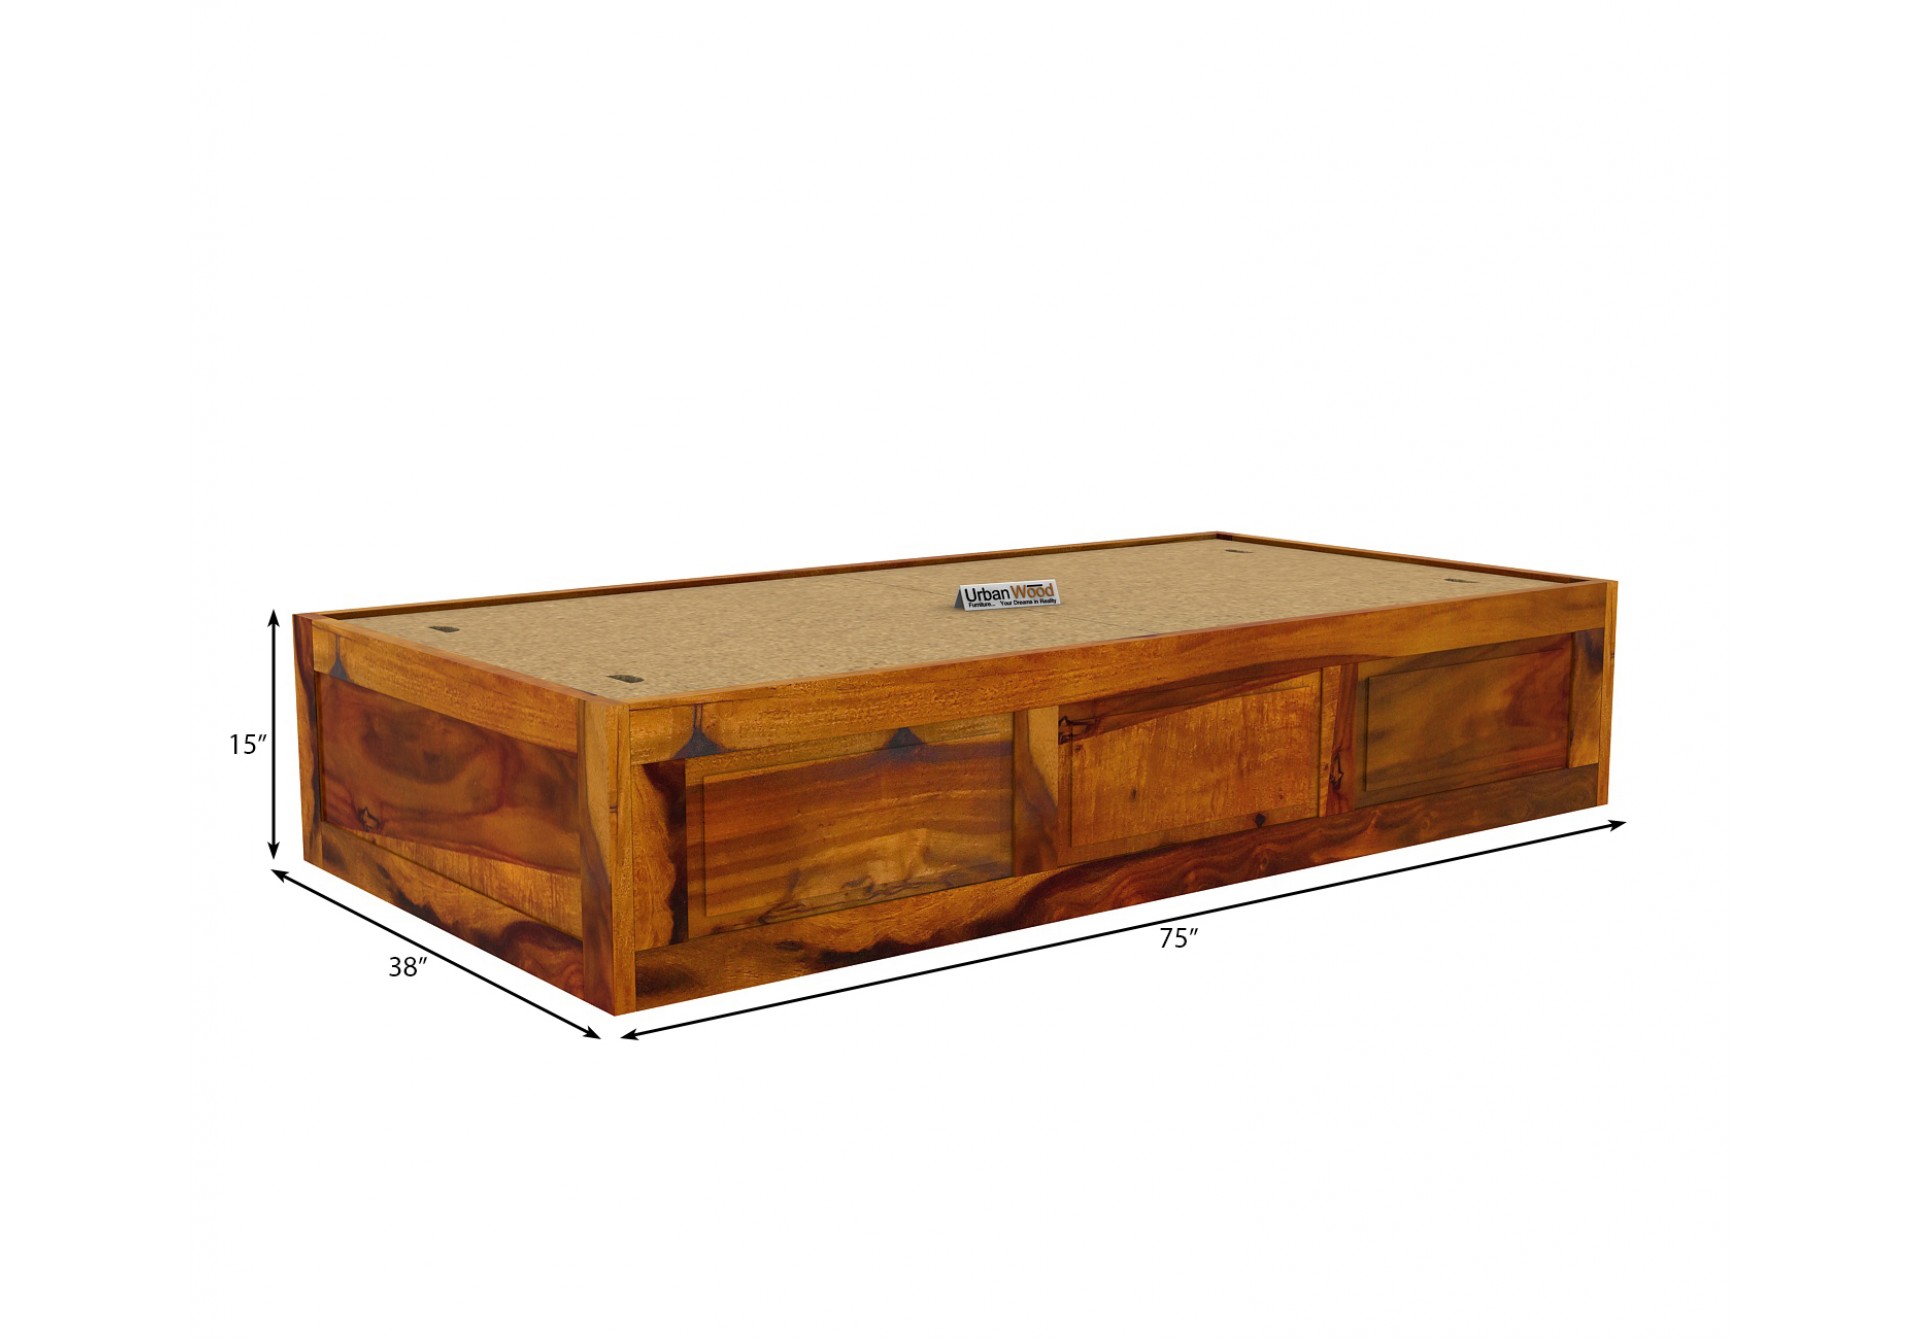 Solas Diwan Bed With Storage (Honey Finish)